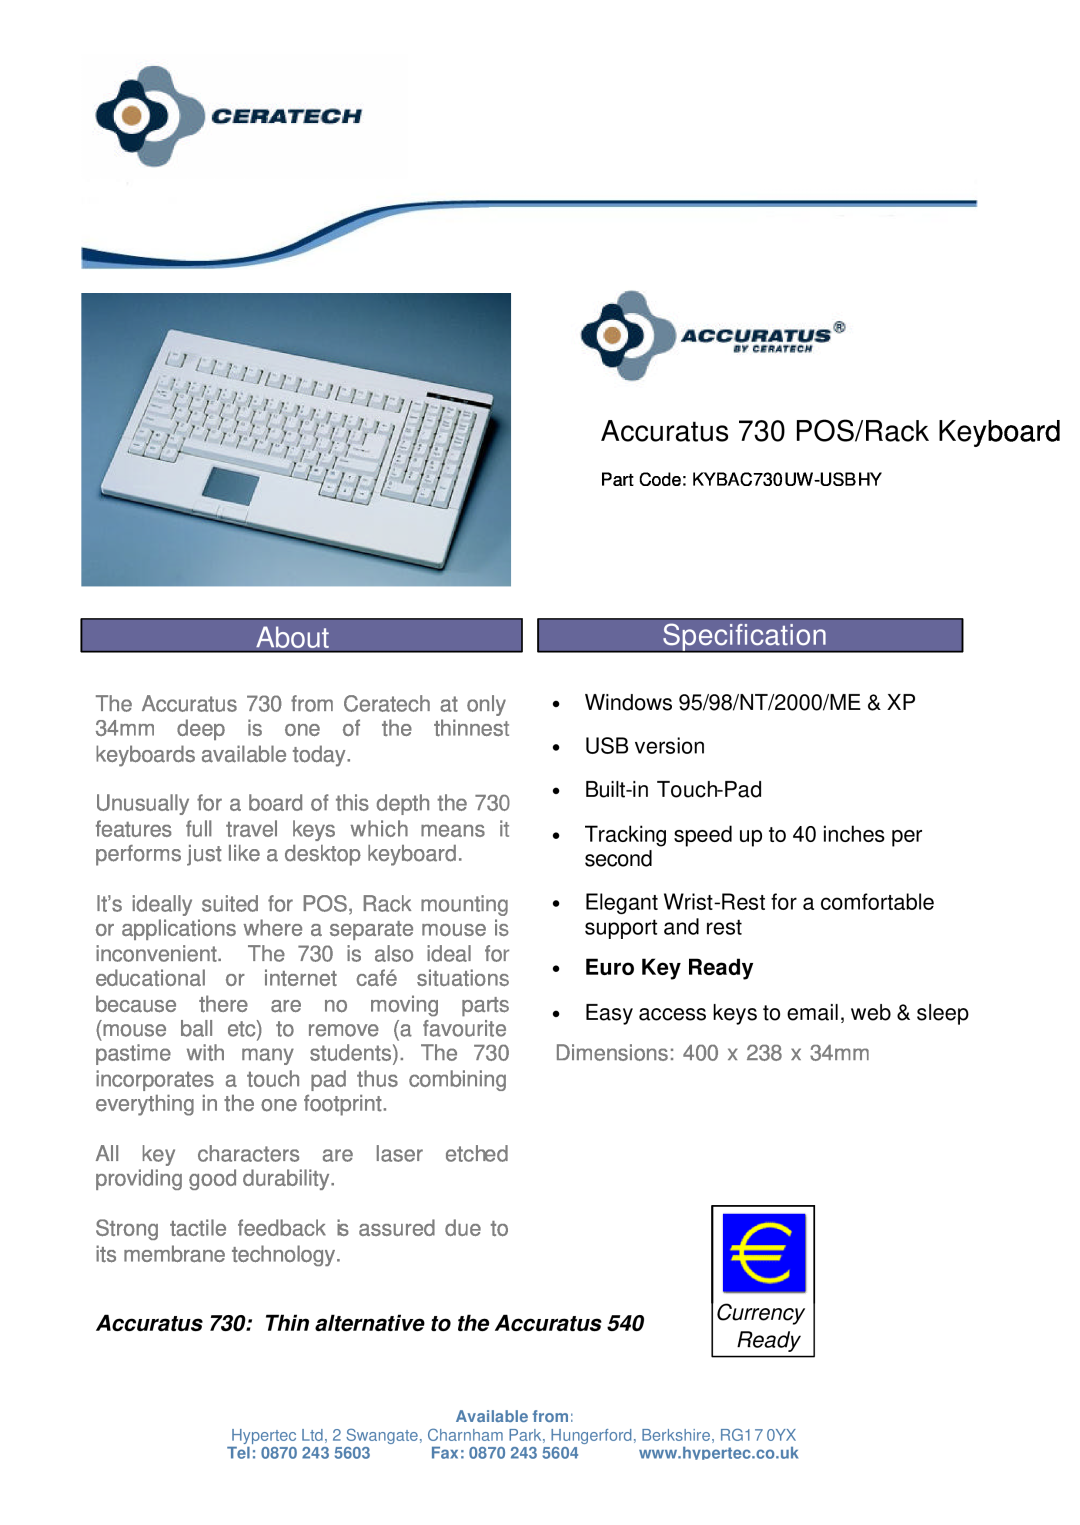 Hypertec KYBAC730UW-USBHY dimensions About, Accuratus 730 POS/Rack Keyboard, Specification, ∙ Euro Key Ready 